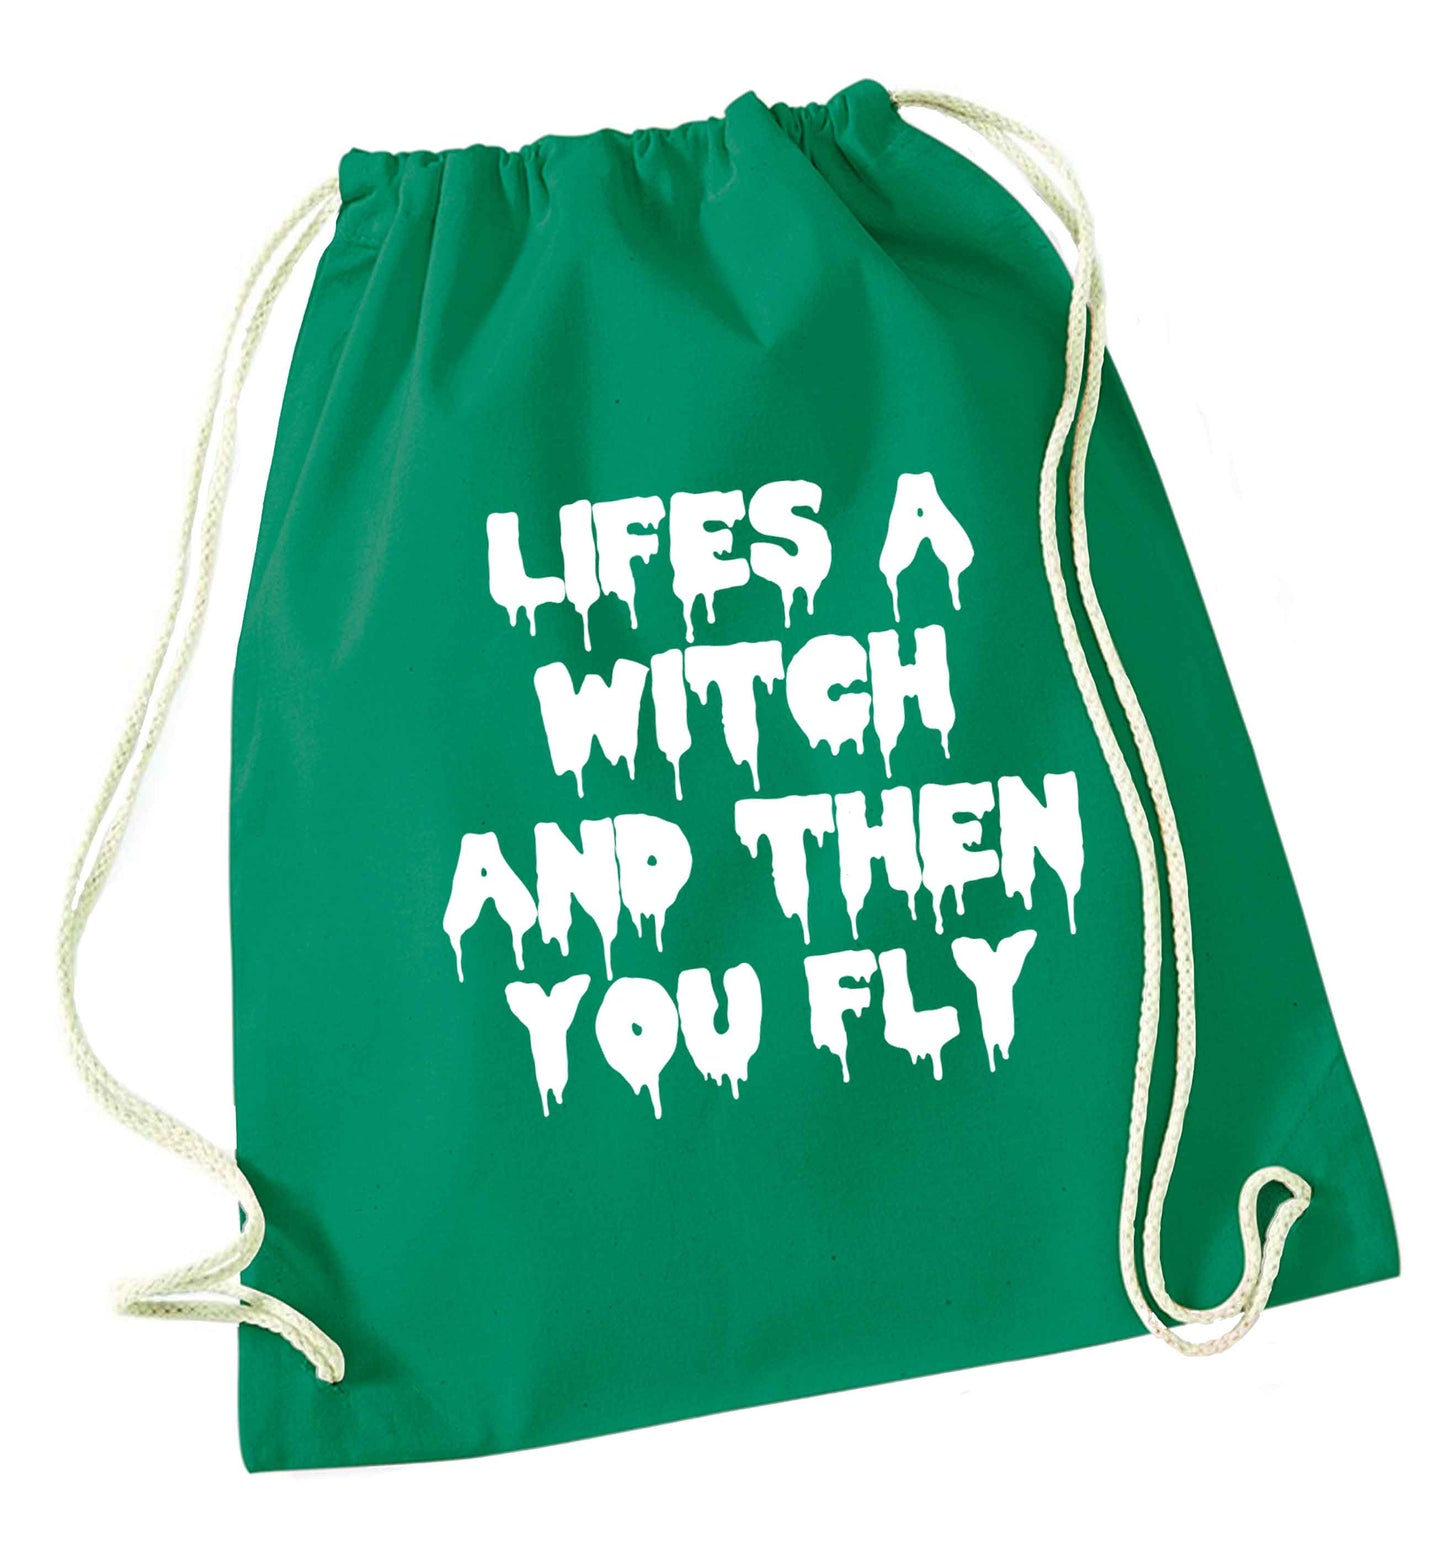 Life's a witch and then you fly green drawstring bag